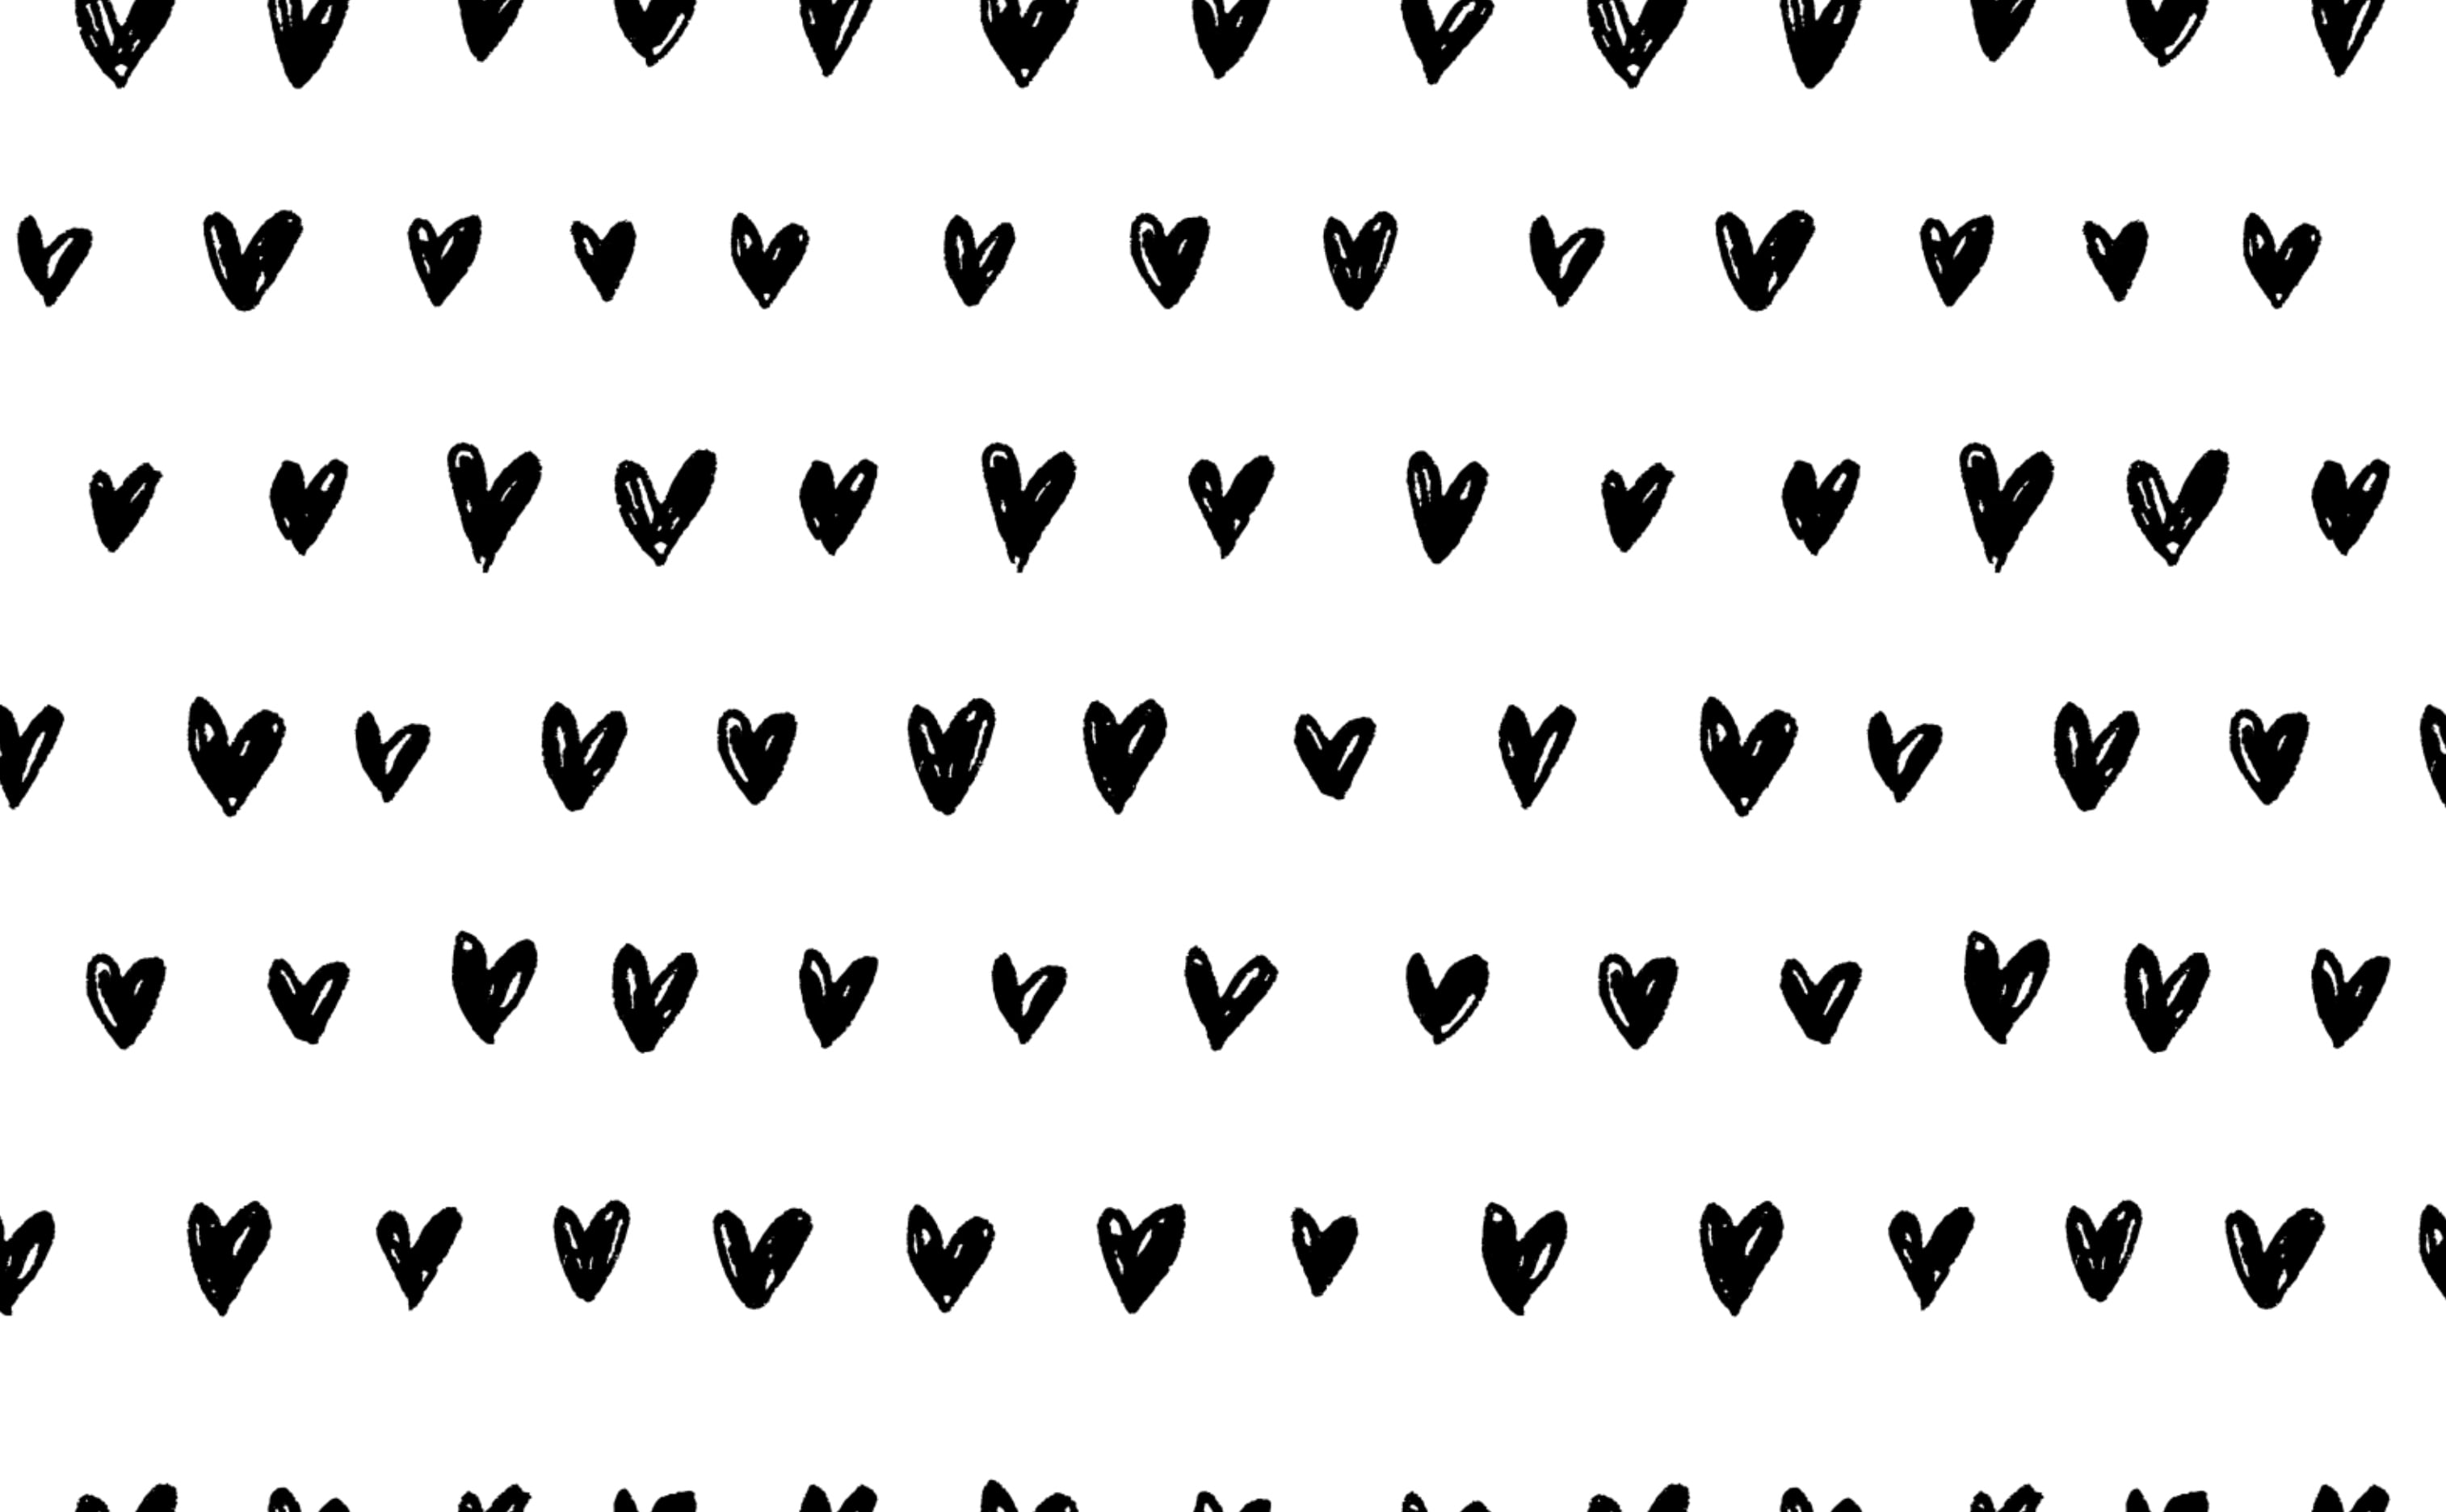 Rows of Black & White Hearts Wallpaper for Walls | Inked Hearts